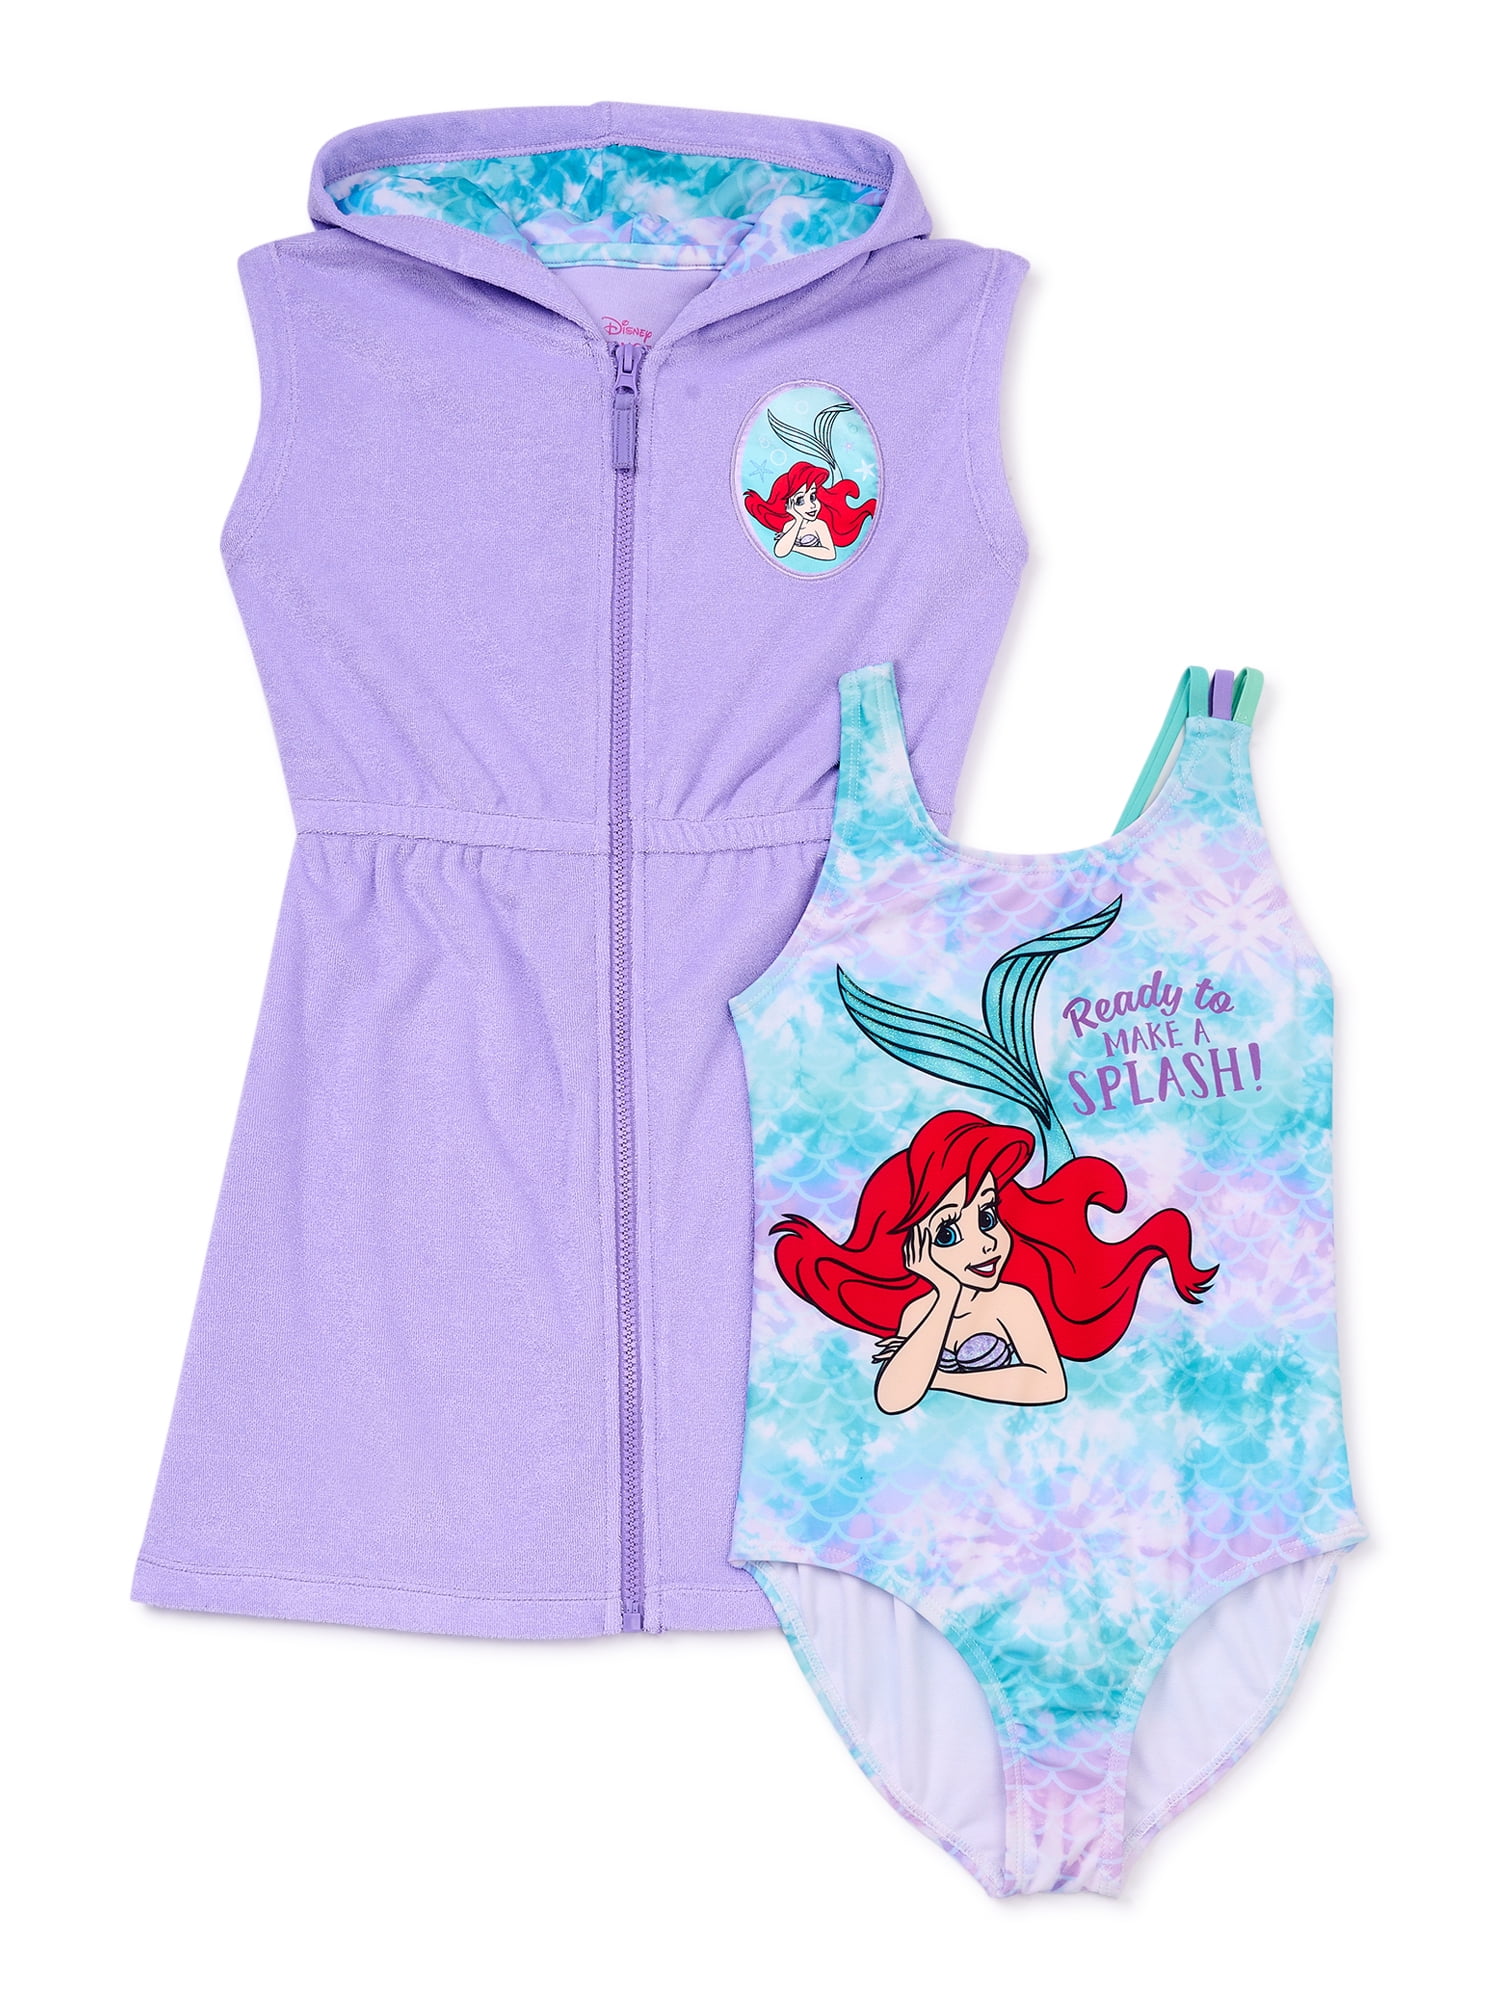 Mermaid Ariel Toddler Girls Swimsuit and Cover-Up Sets Purple Size 2T 